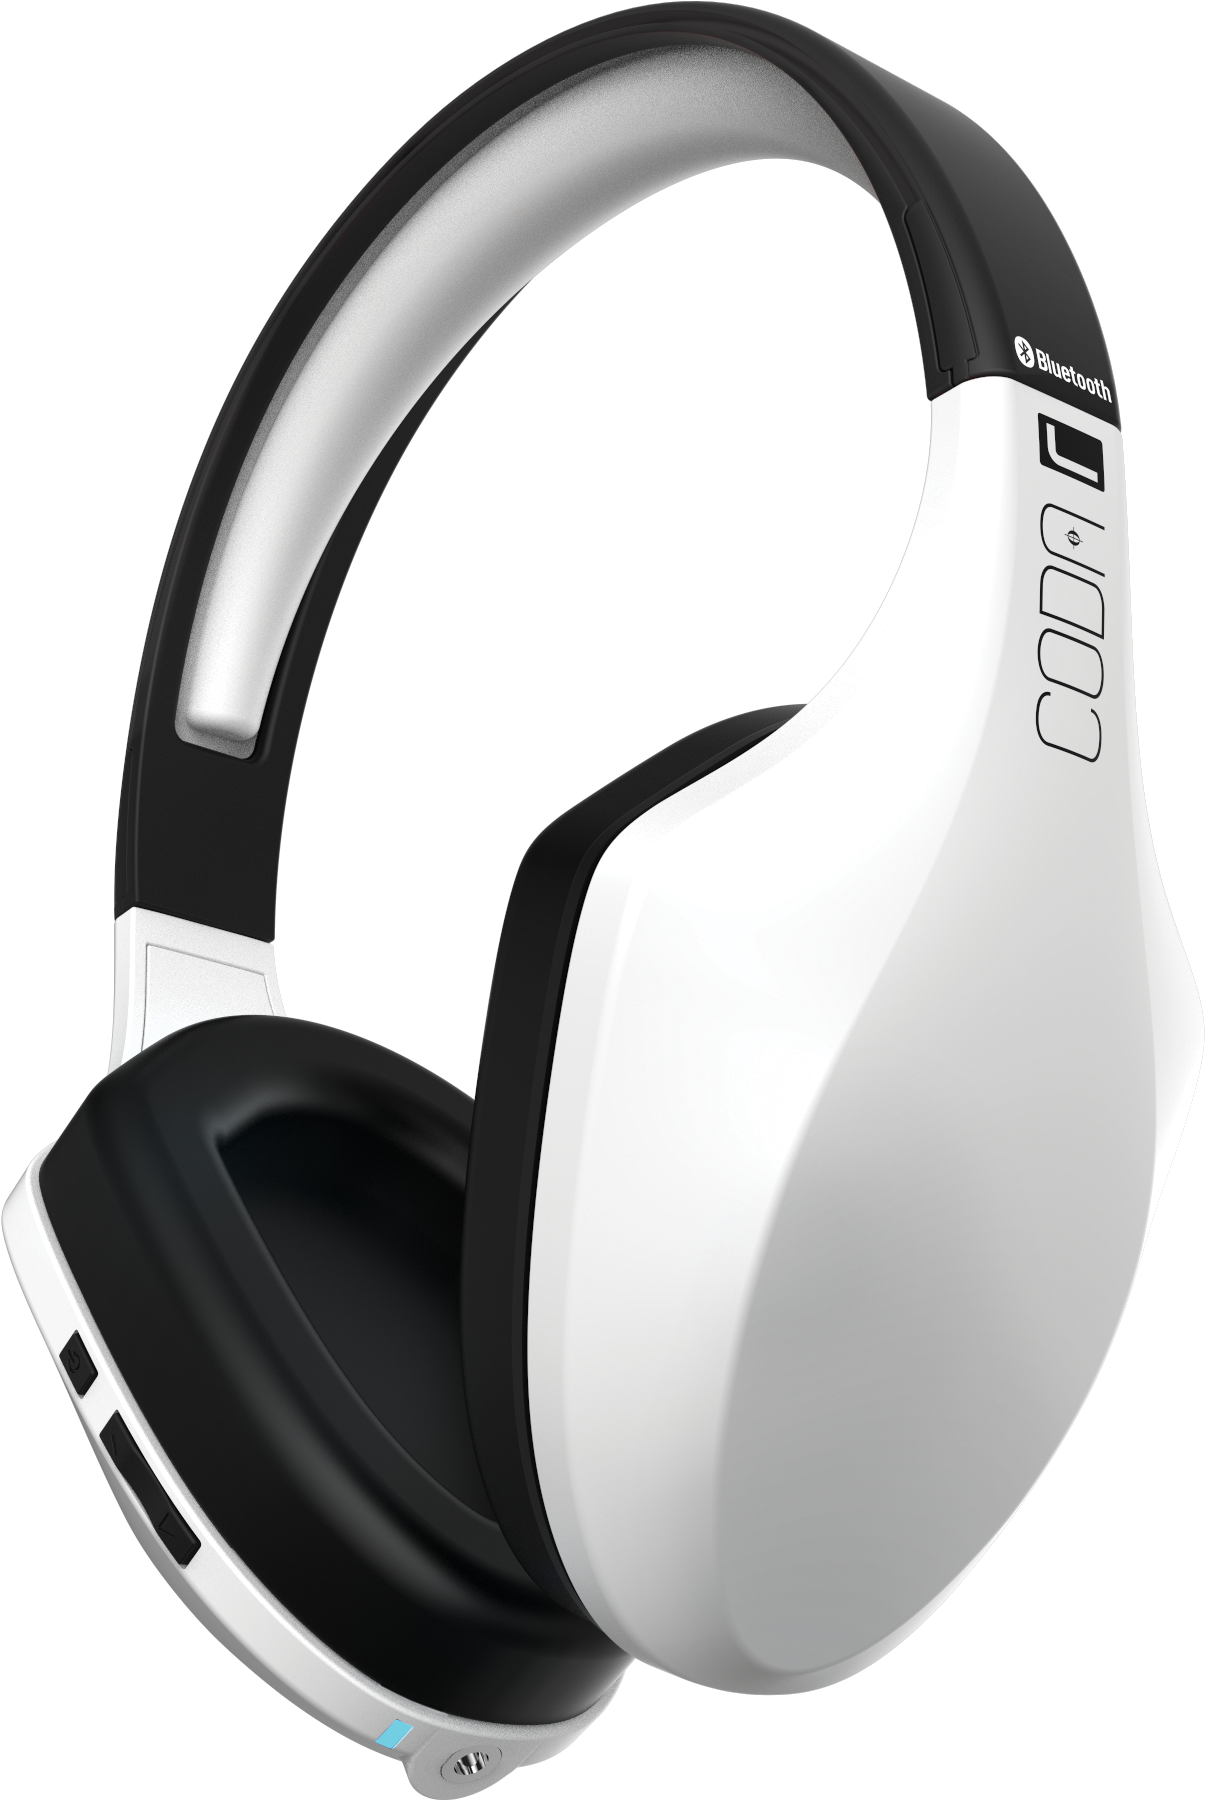 Modern White Bluetooth Headset PNG